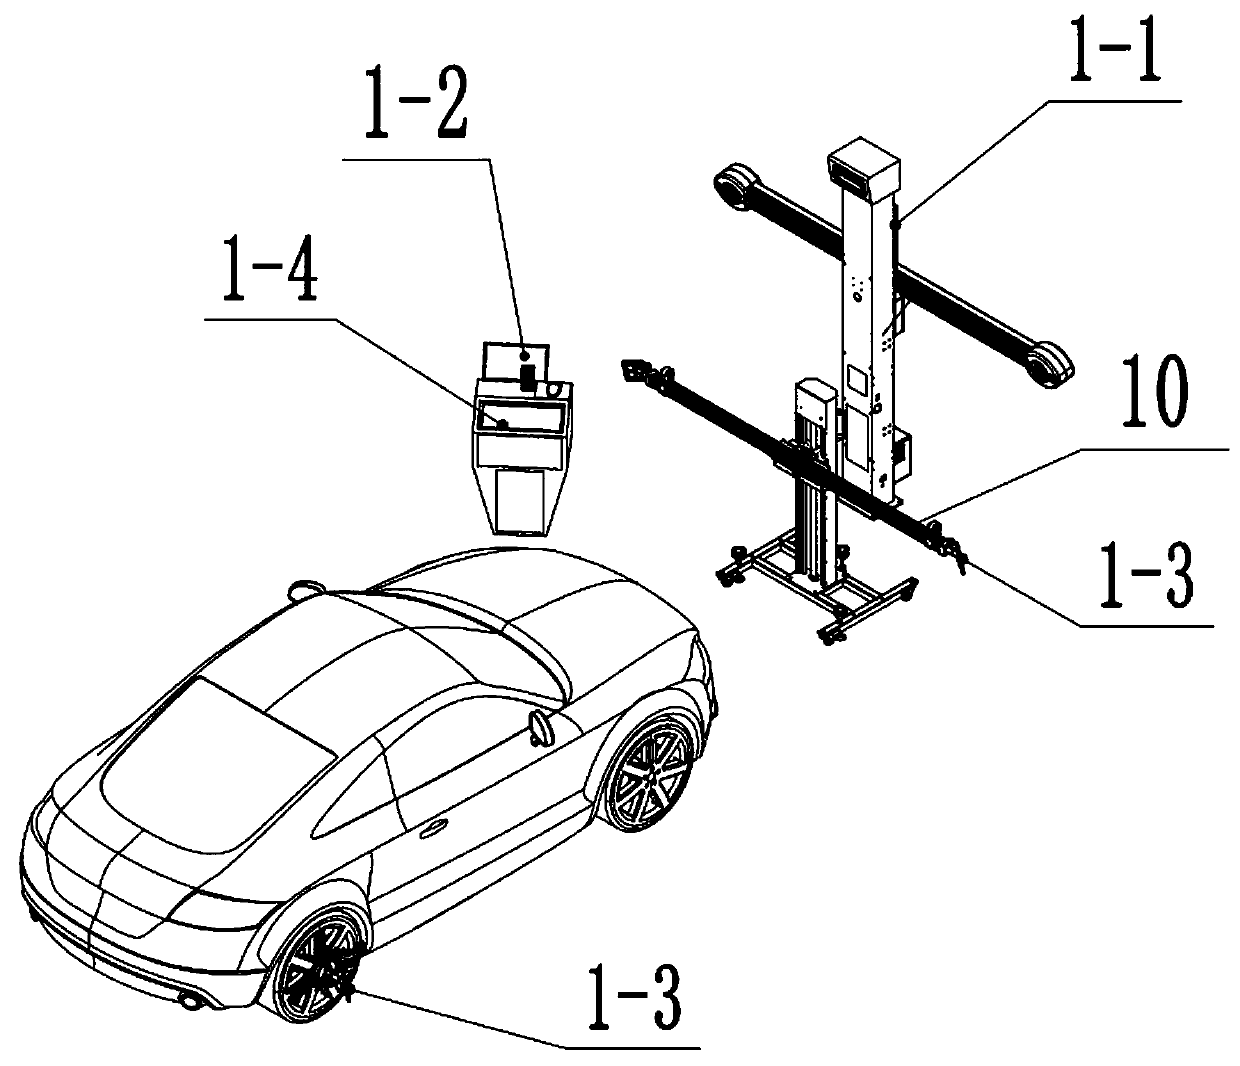 Relative position adjustment system for vehicle body